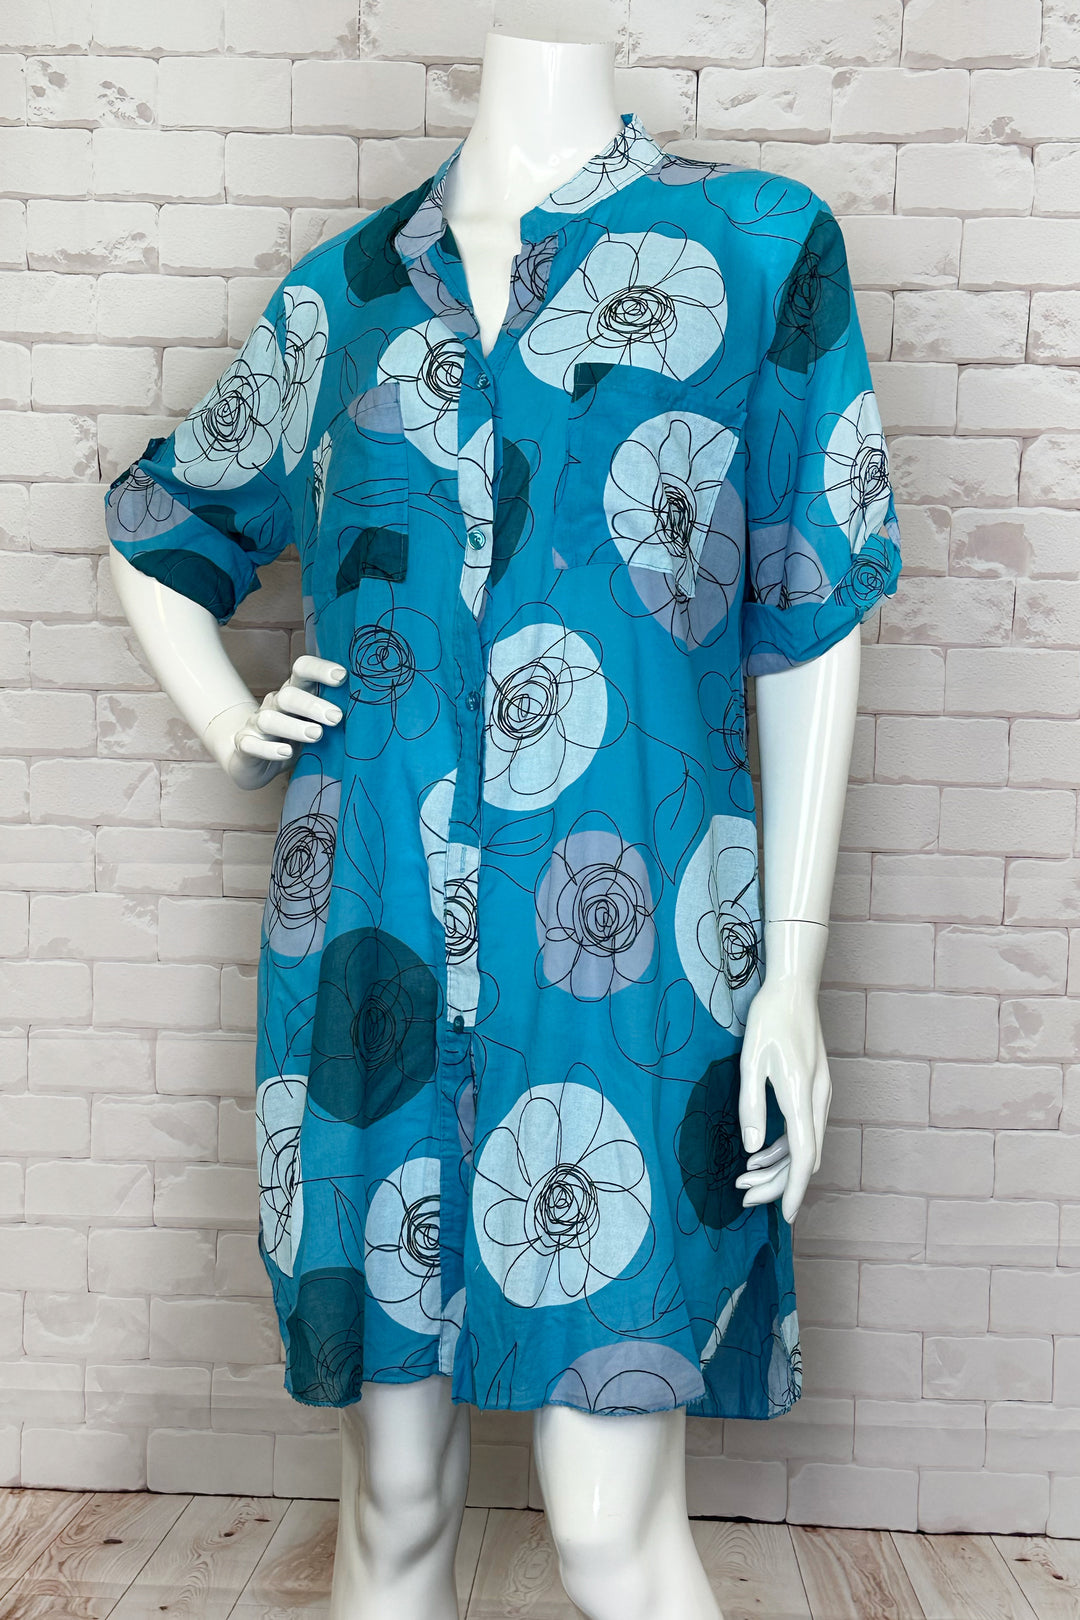 CHERISHH Spring 2024 Made of 100% cotton, this dress features a tunic collar and a neat floral print. The half sleeves and loose relaxed fit make it perfect for a day at the beach or as a casual house dress. 